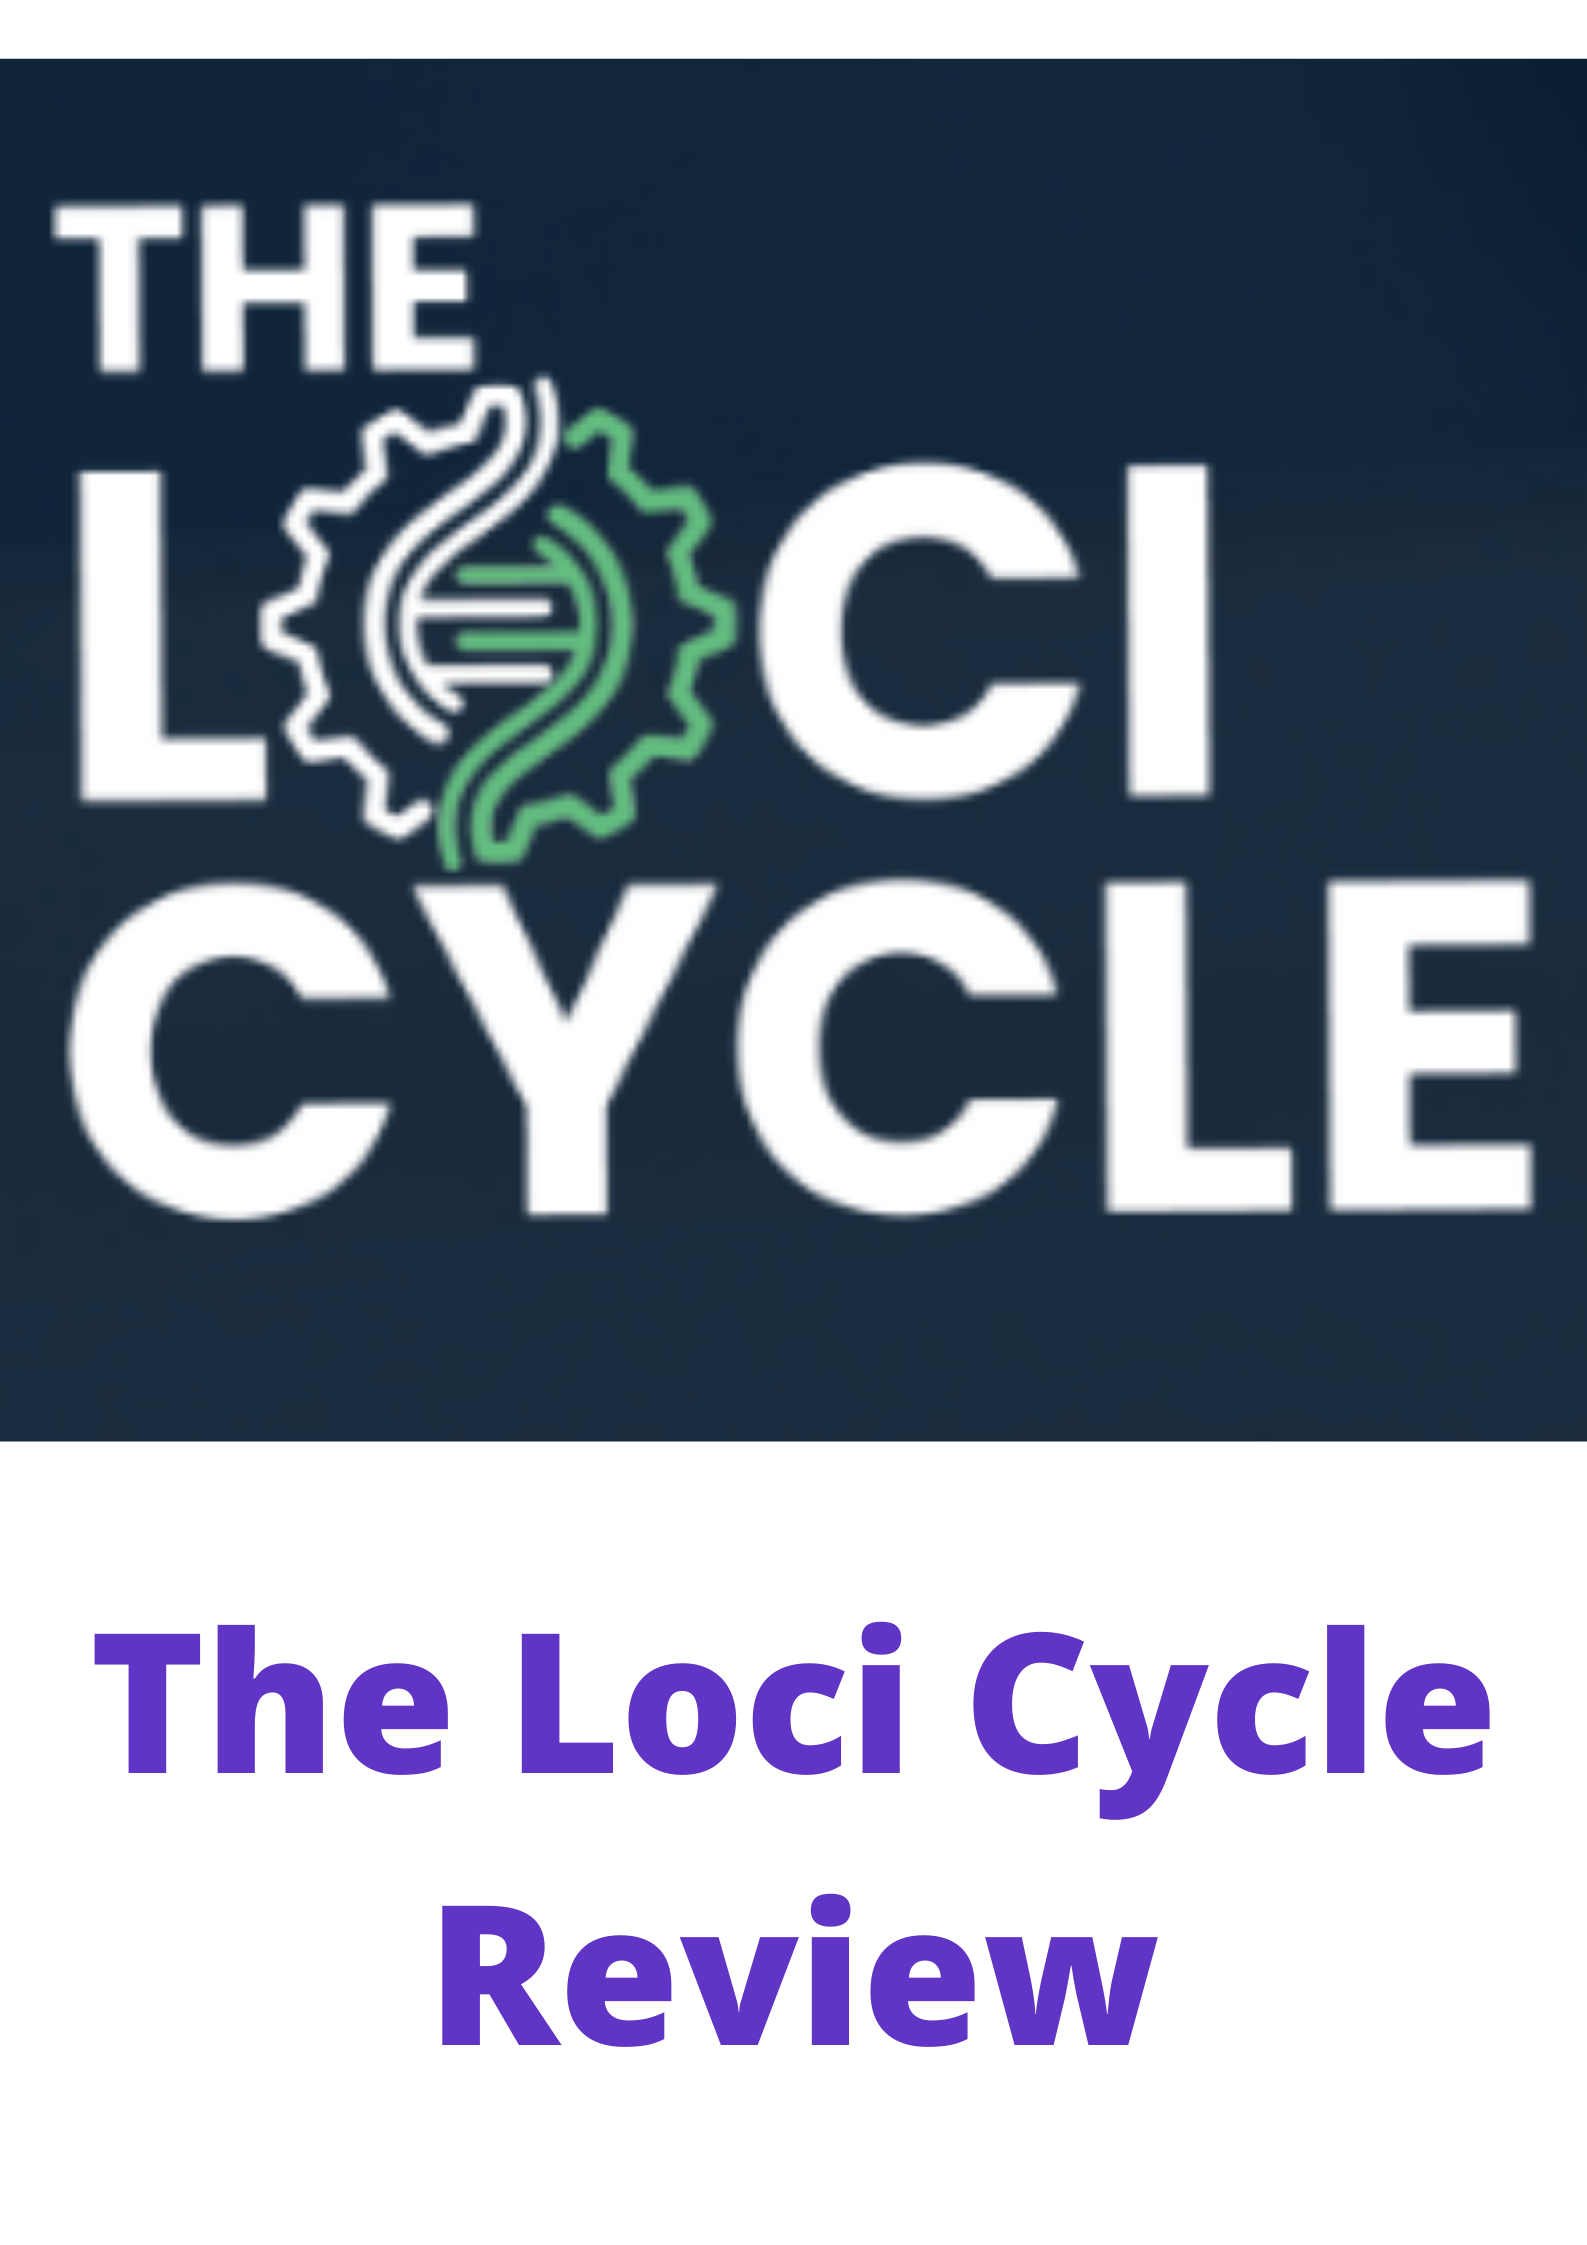 The Loci Cycle review